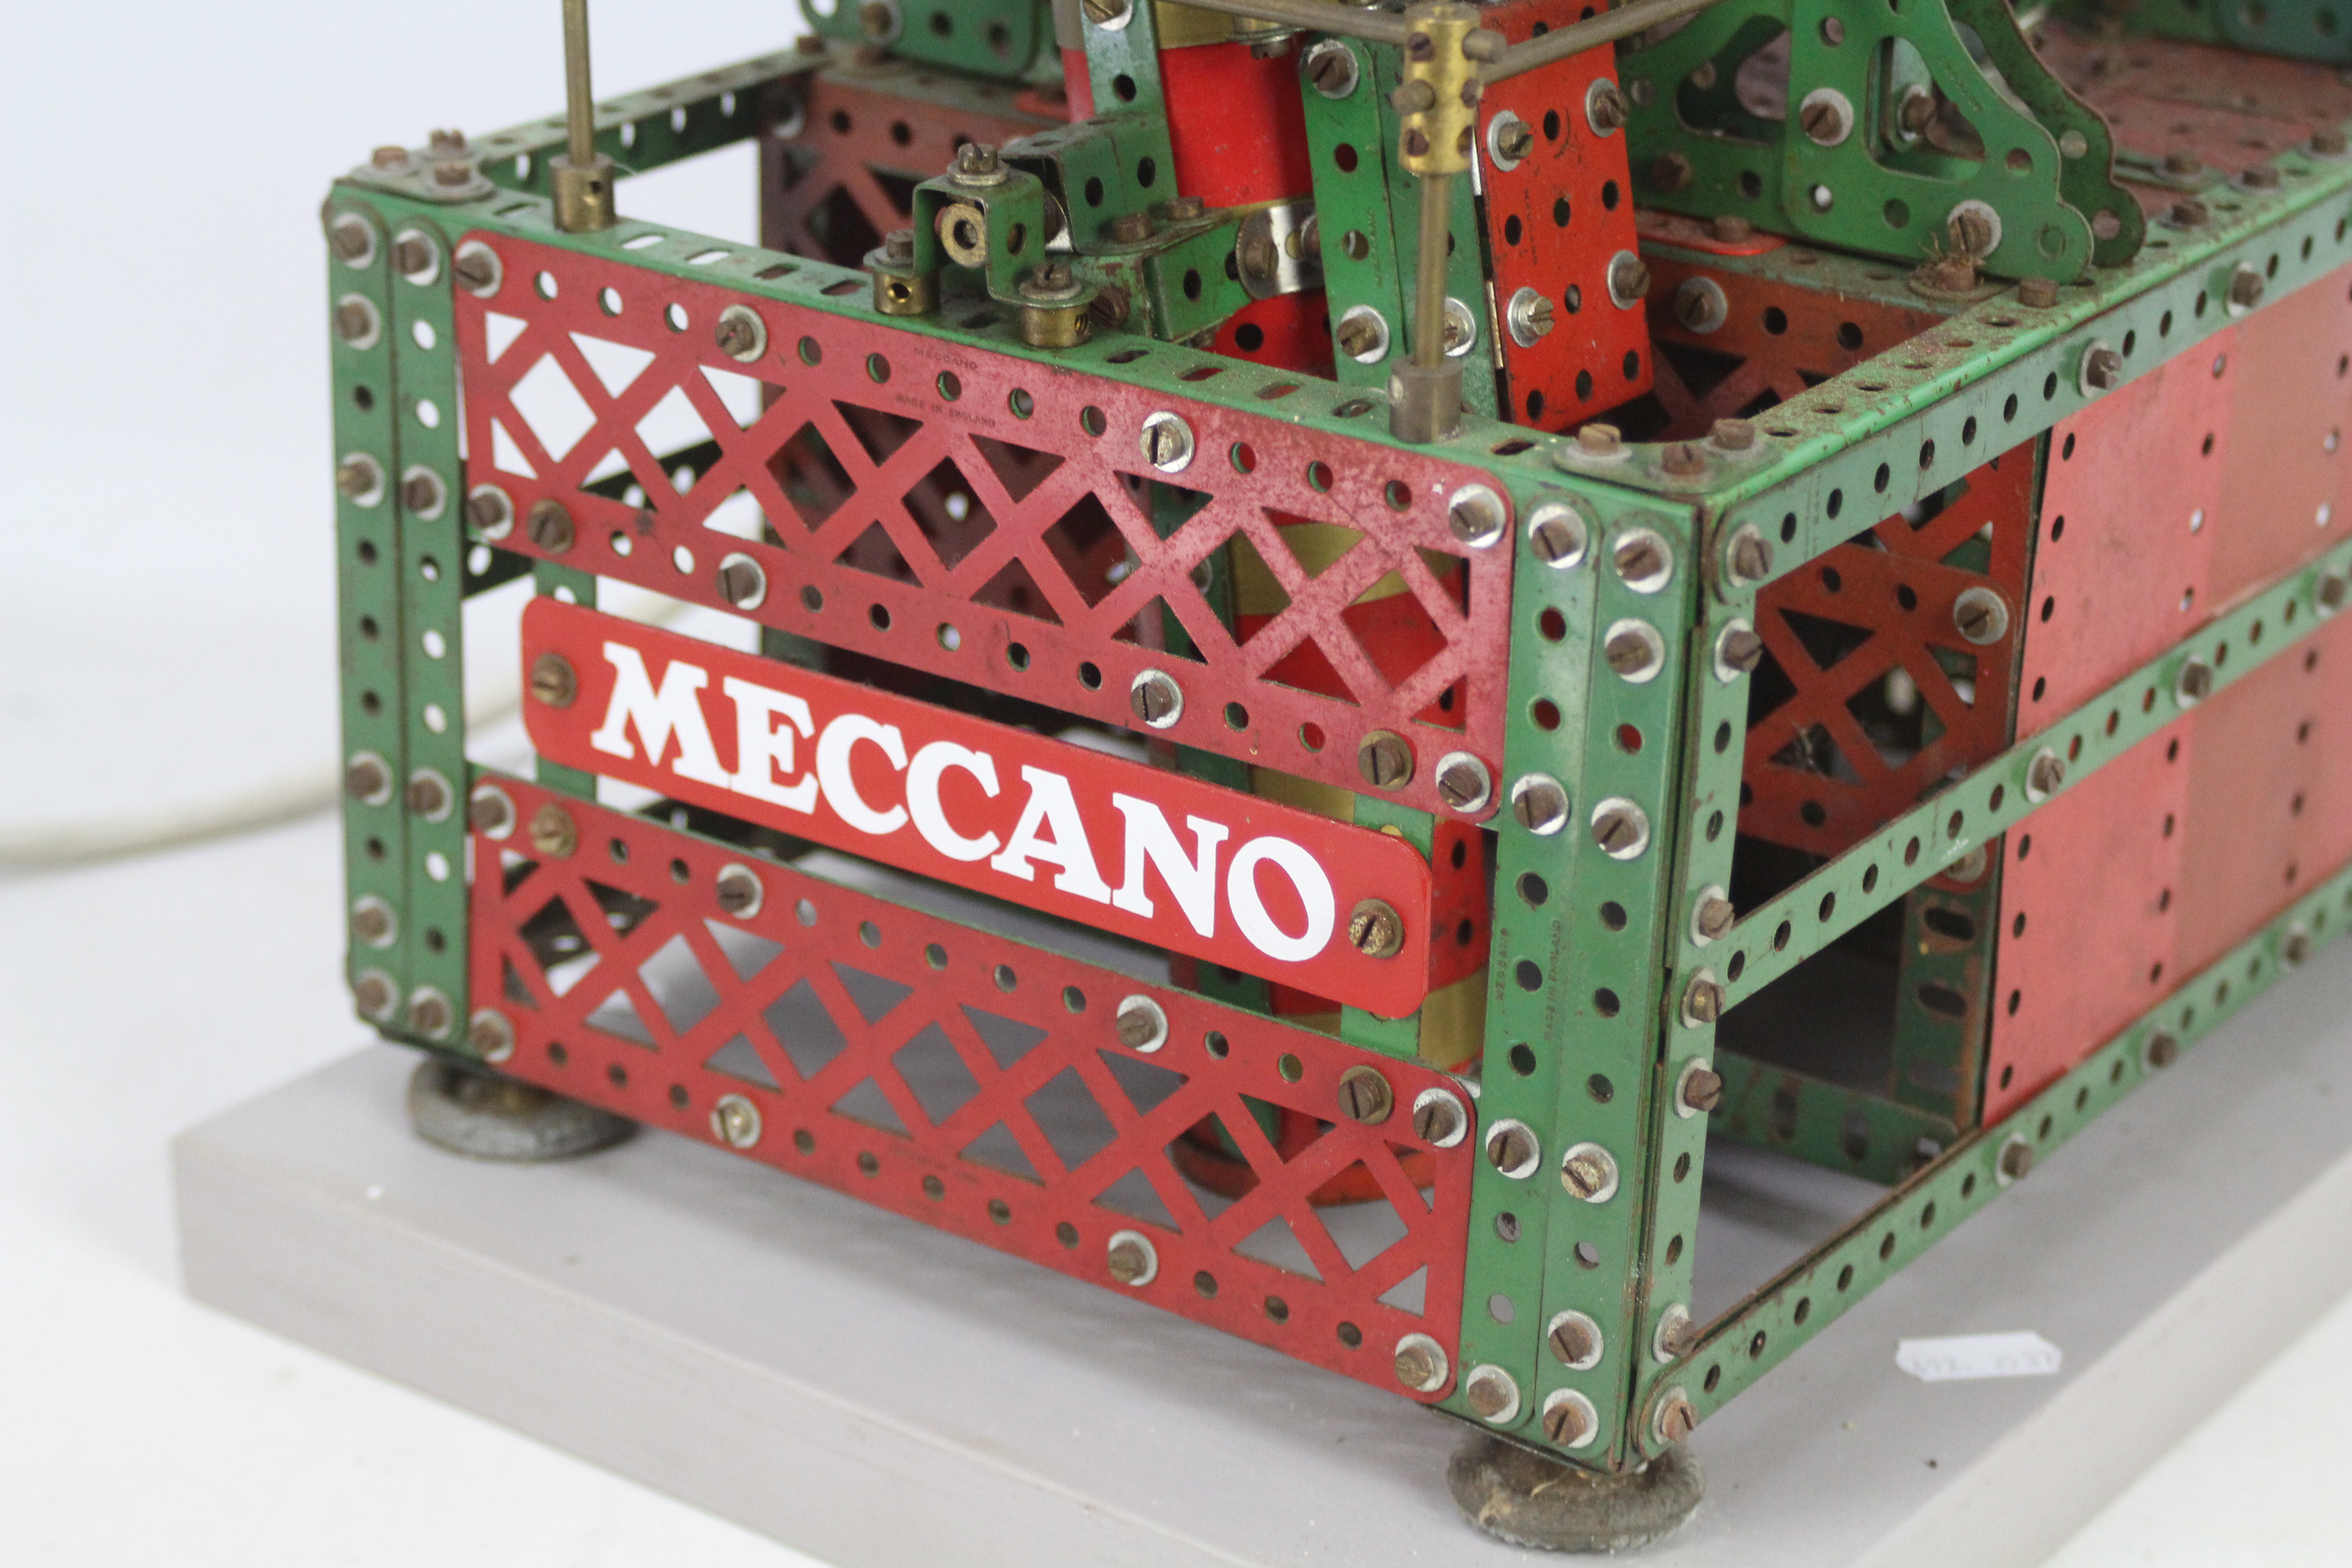 Meccano - A vintage red and green Meccano shop display model of a Decorative Wheel. - Image 4 of 8